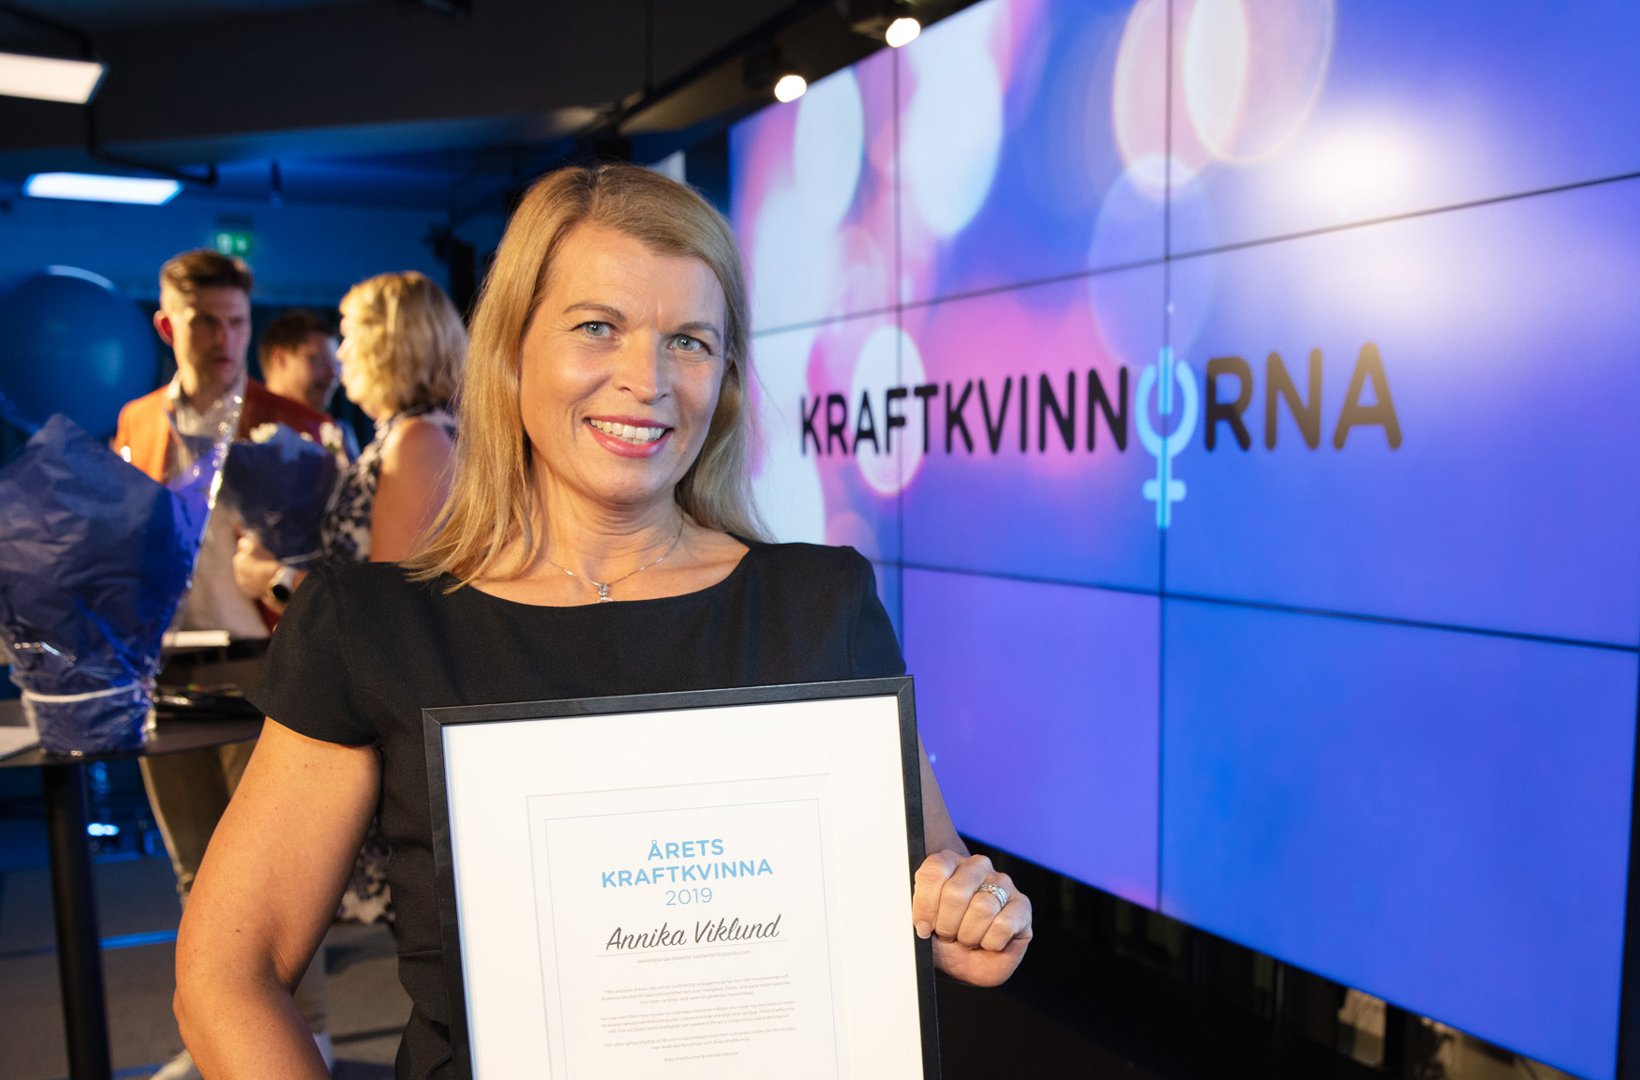 Annika Viklund, Senior Vice President and Head of Business Area Distribution has won the Power Woman of the Year award.